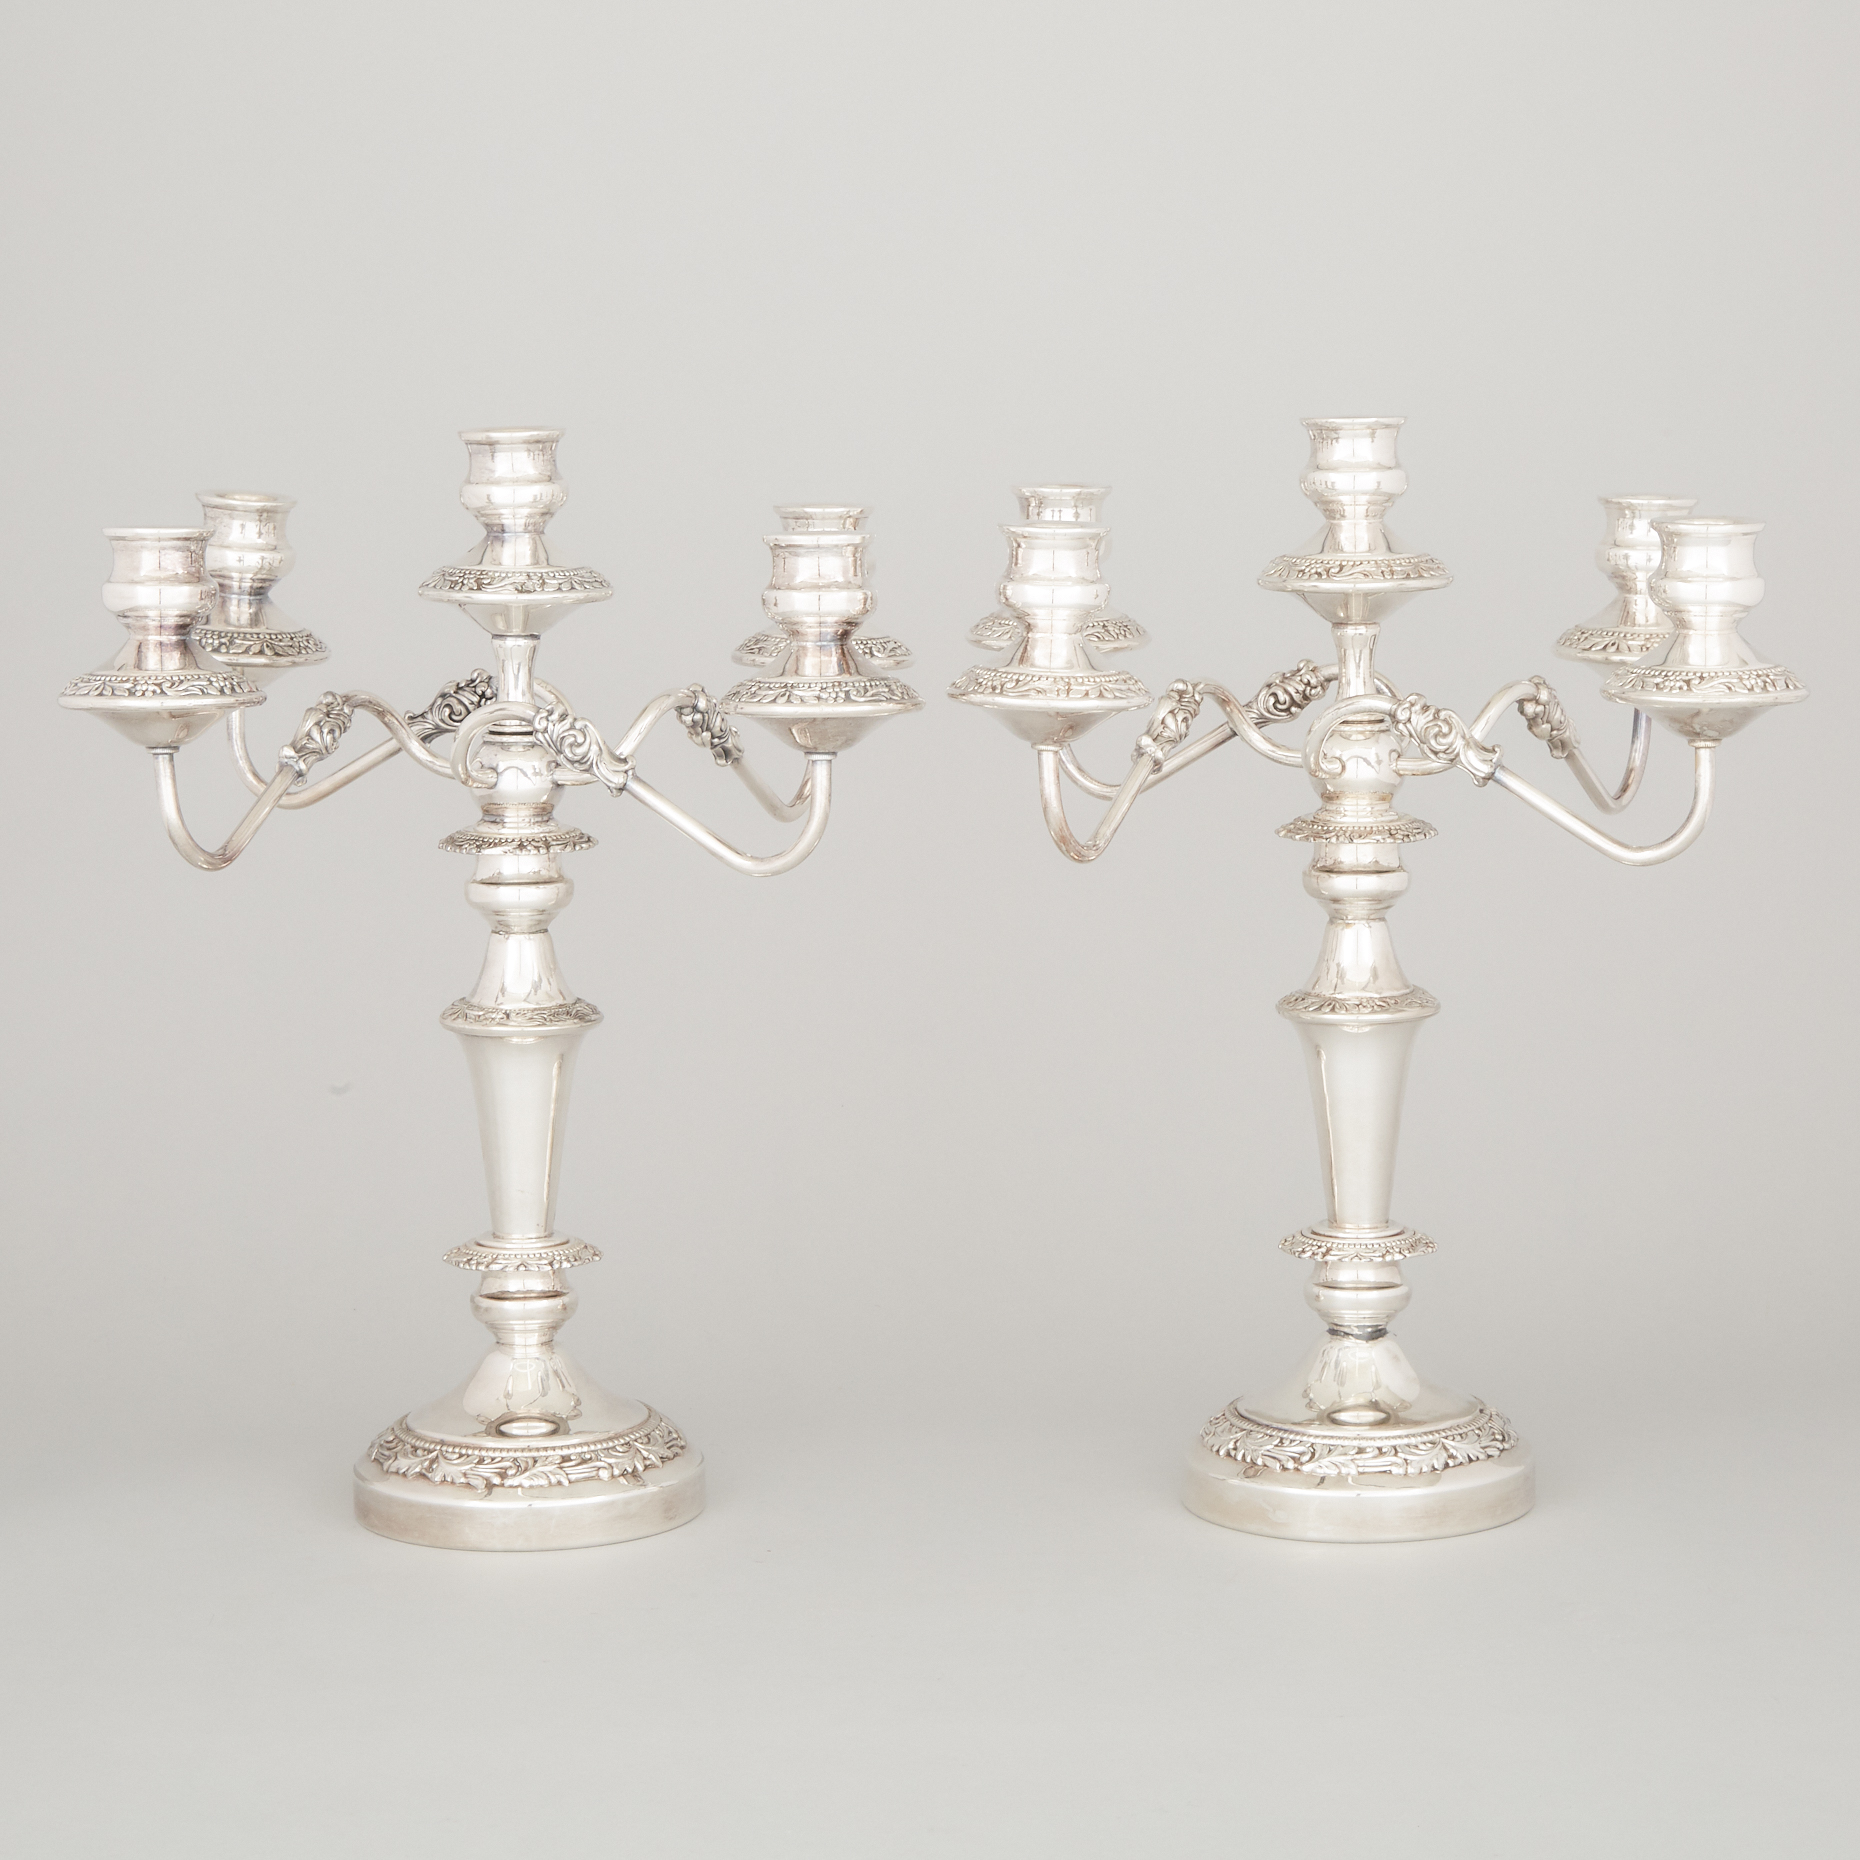 Pair of American Silver Plated Five-Light Candelabra, Barbour Silver Co.,  late 19th/early 20th century